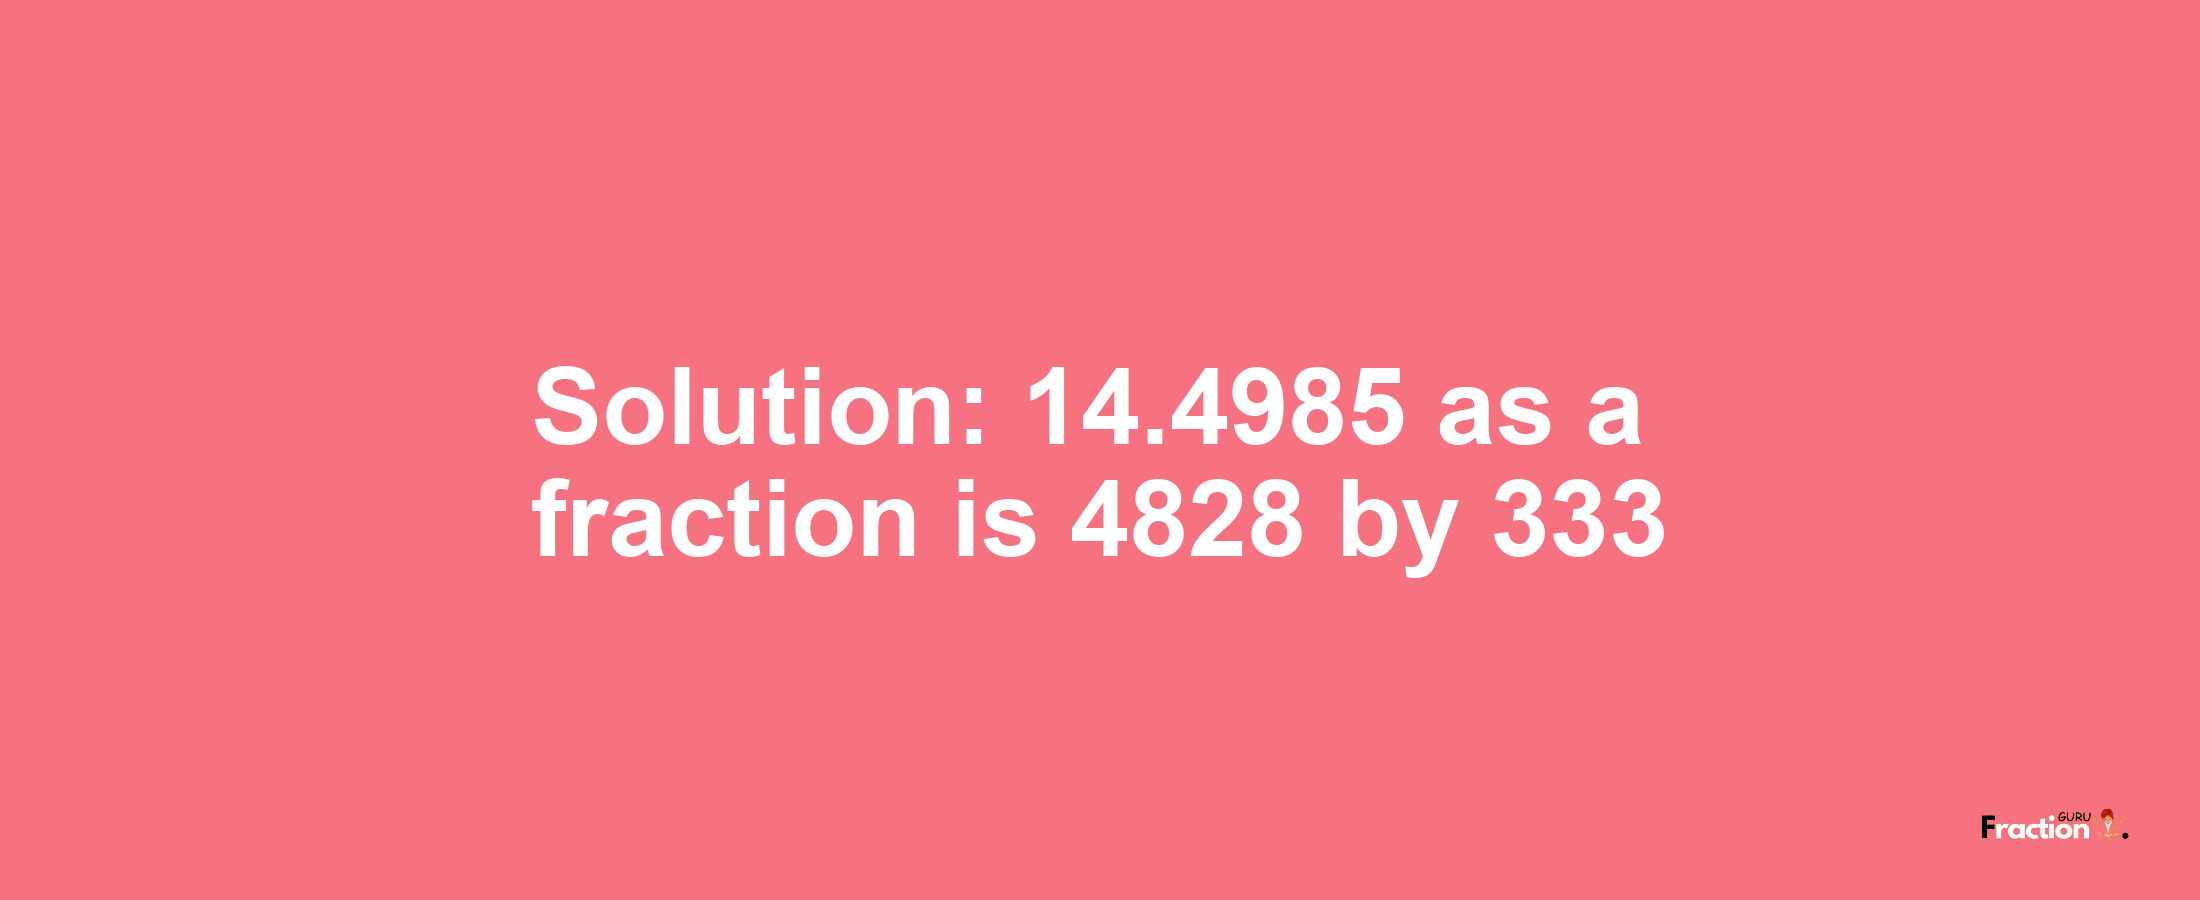 Solution:14.4985 as a fraction is 4828/333